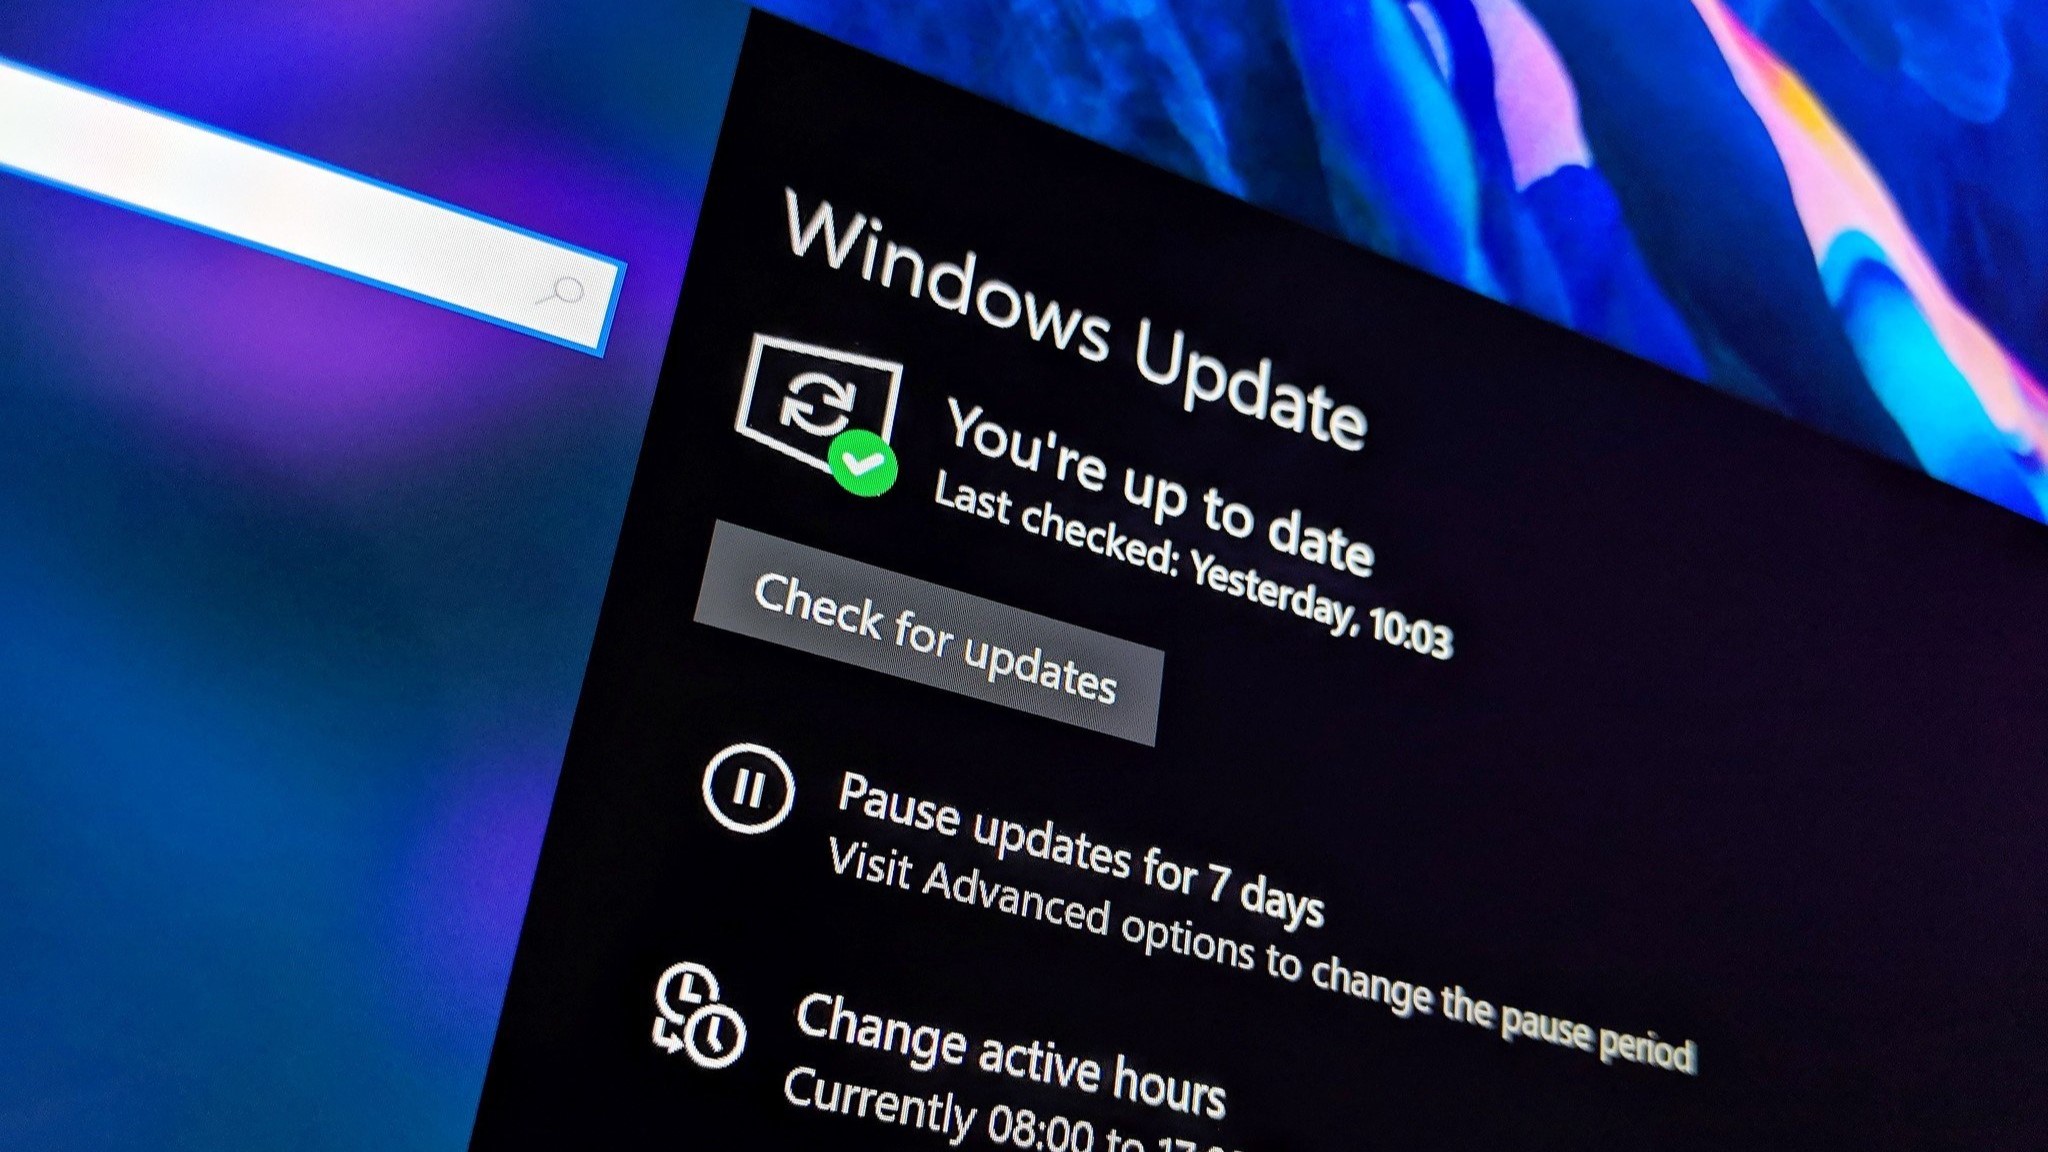 Microsoft pressures Windows 10 users with full-screen multipage popup ads urging them to upgrade